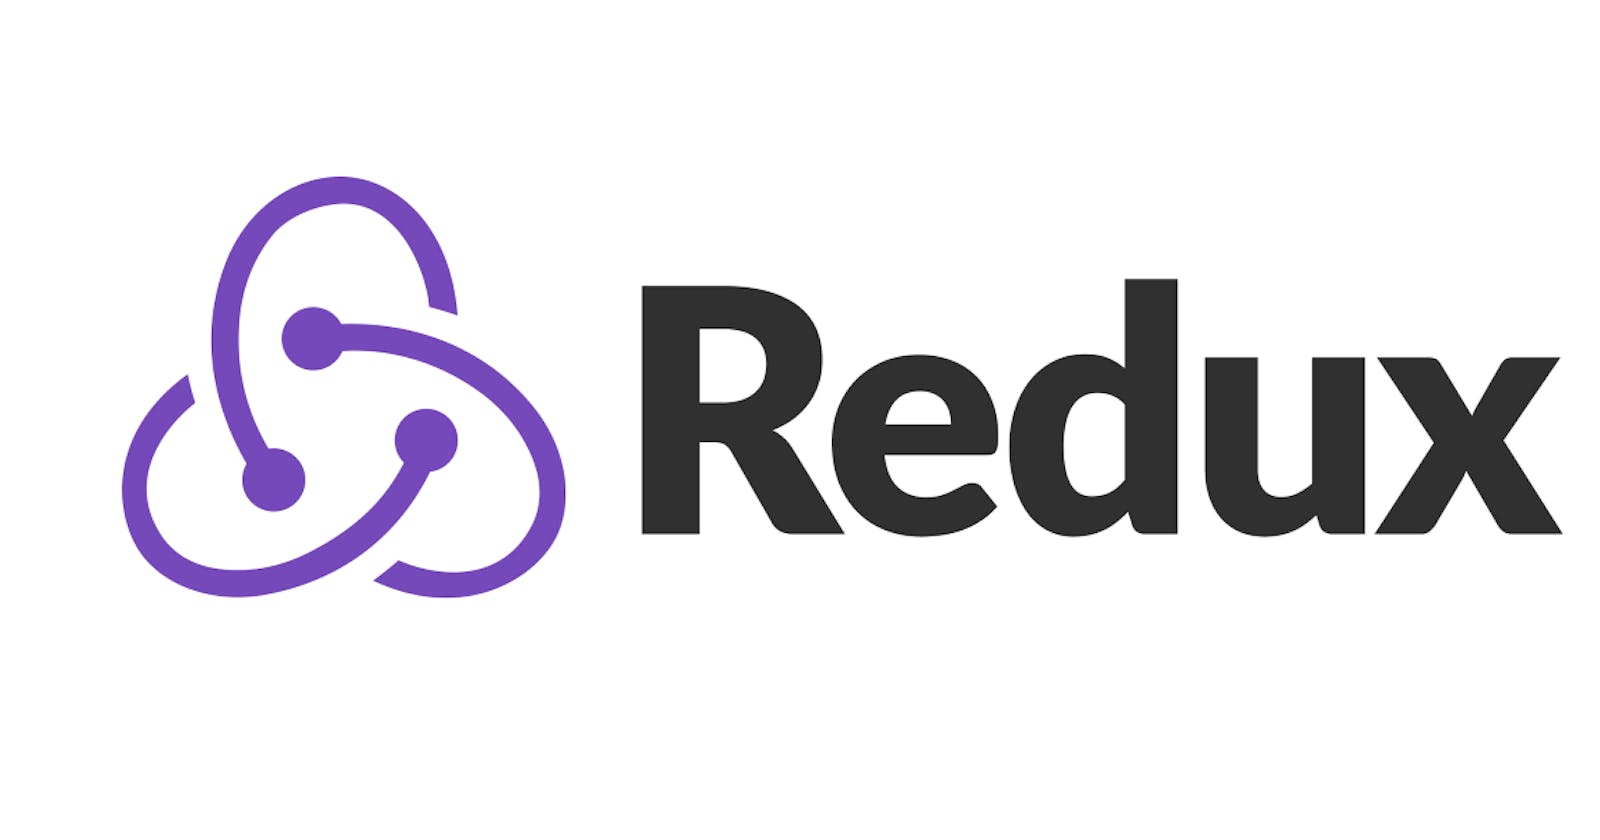 Why Should We Use Redux for State Management?